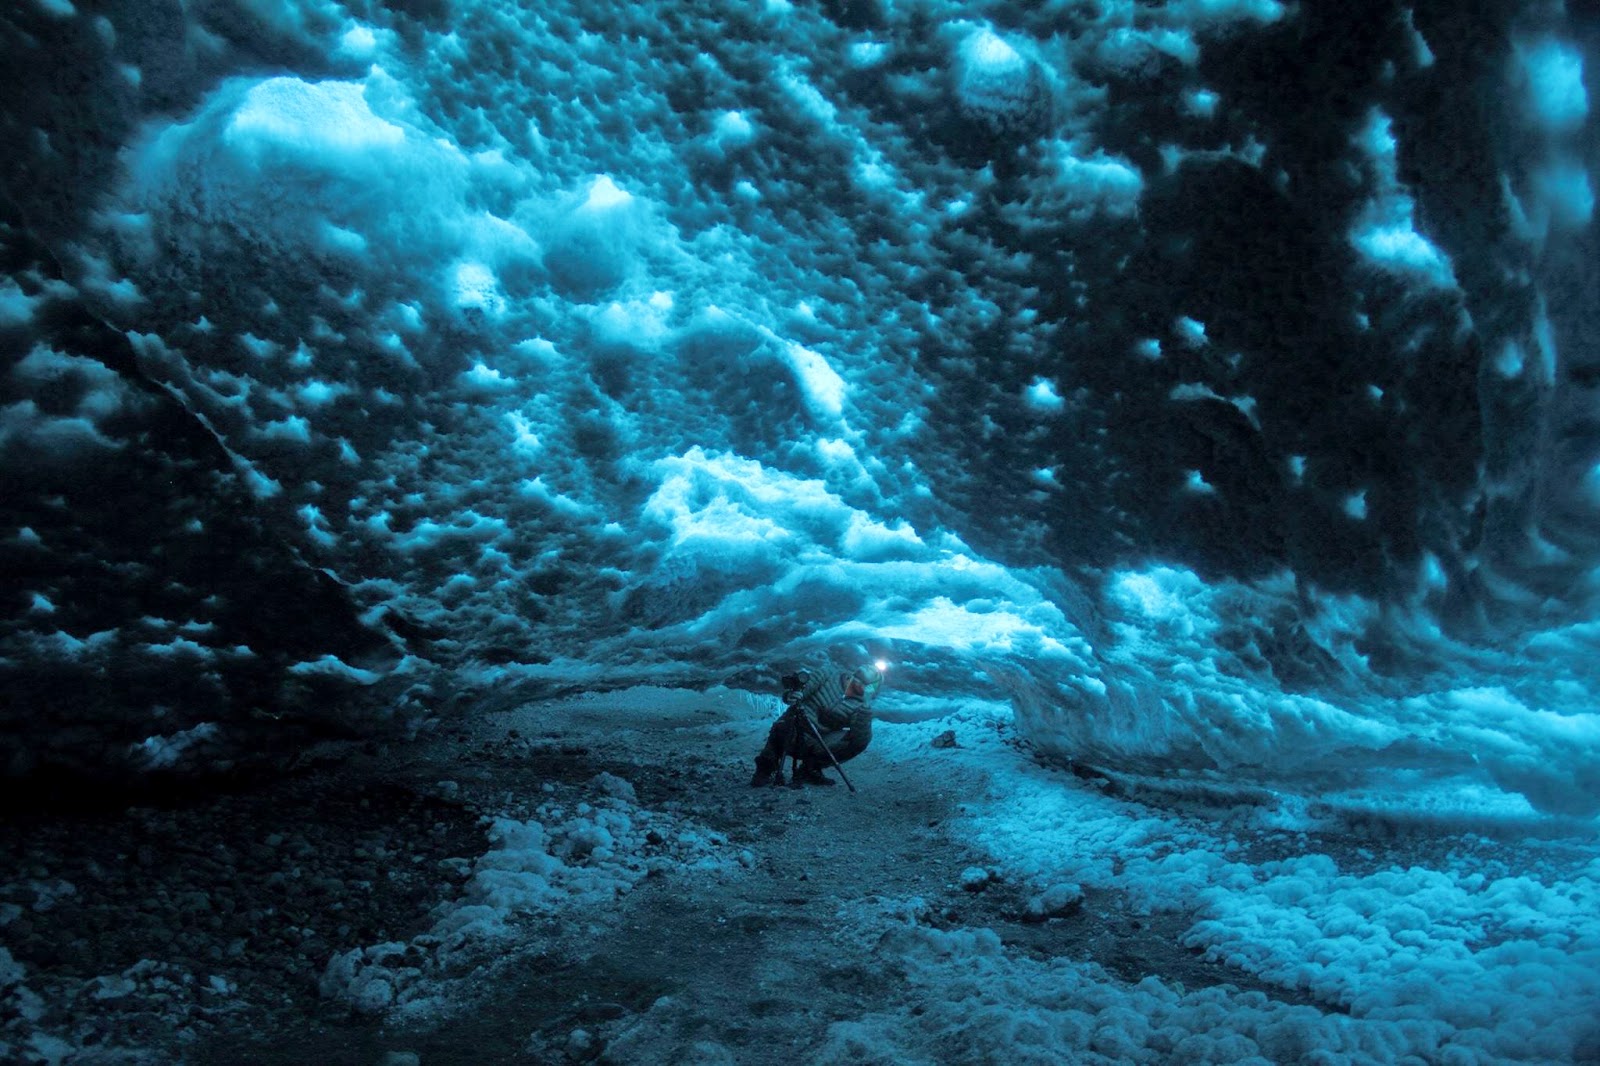 Inside the ice cave...